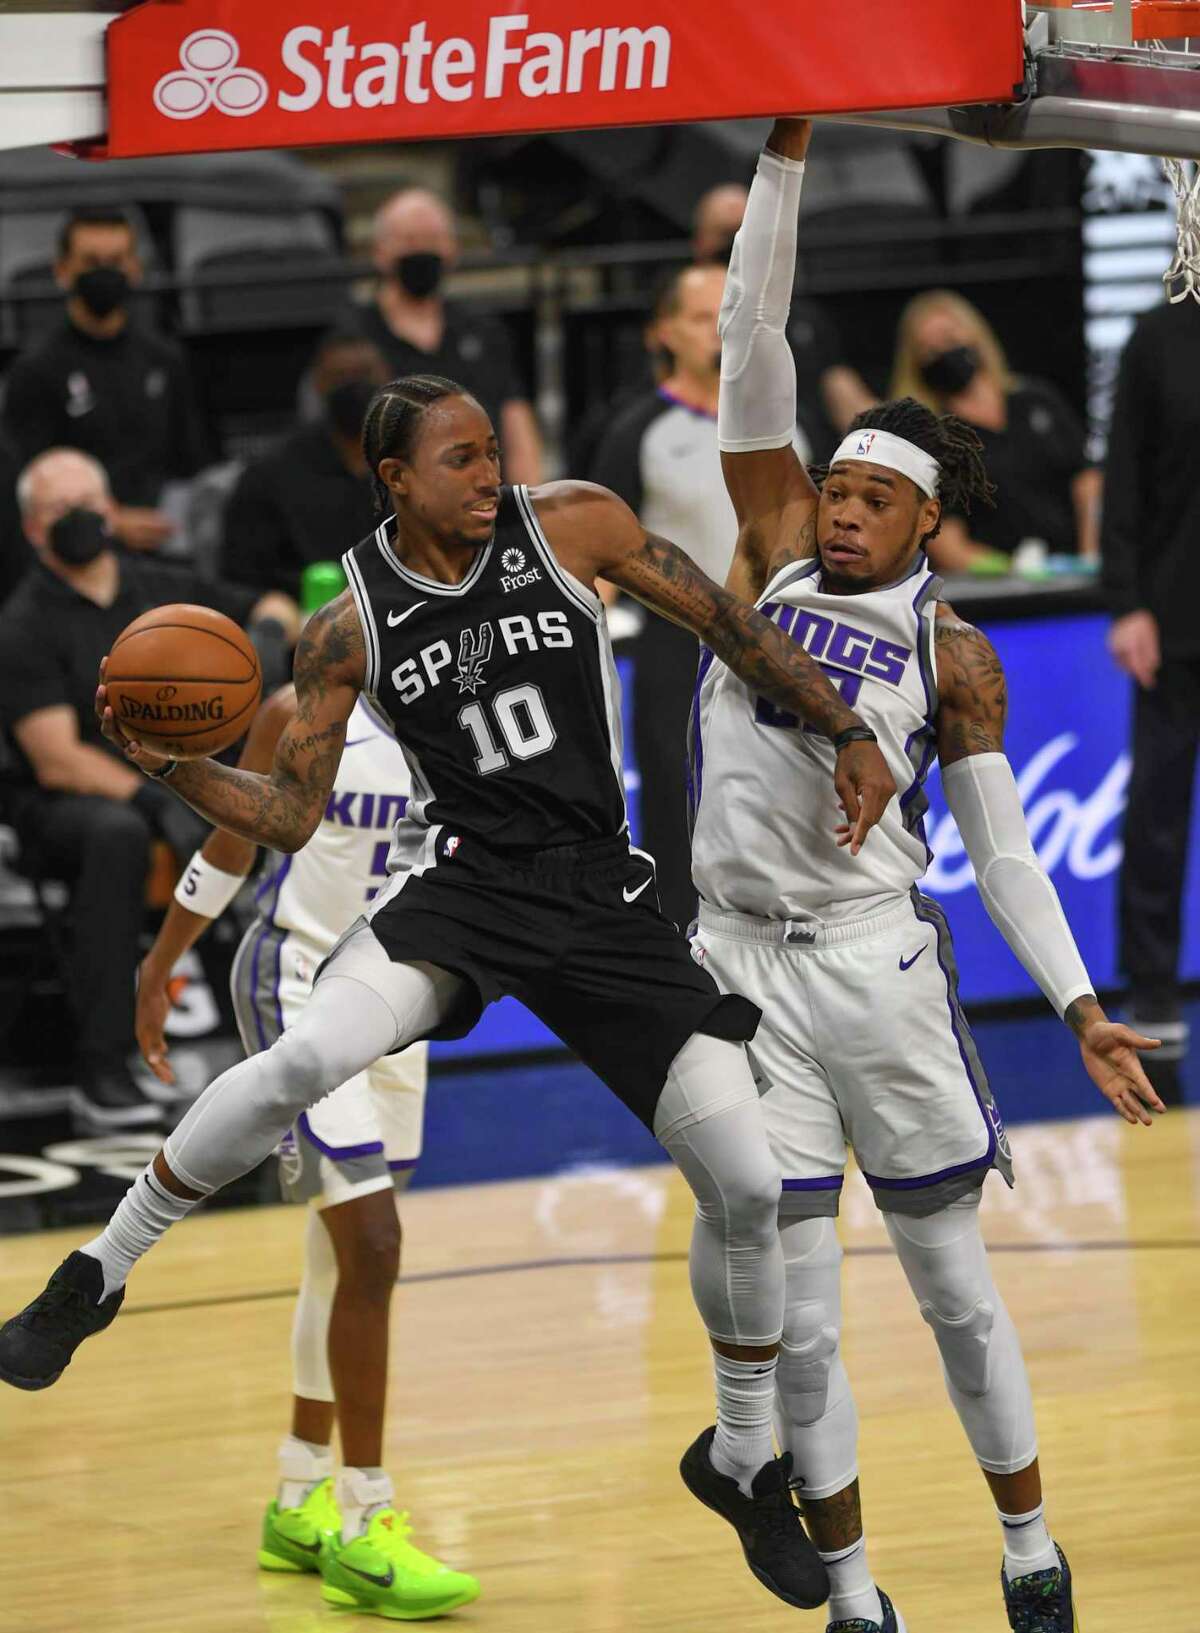 DeMar DeRozan of the San Antonio Spurs dishes off an assist to teammate Patty Mills, who made a three-point shot against the Sacramento Kings during first-half NBA action in the AT&T Center on Wednesday, March 31, 2021.